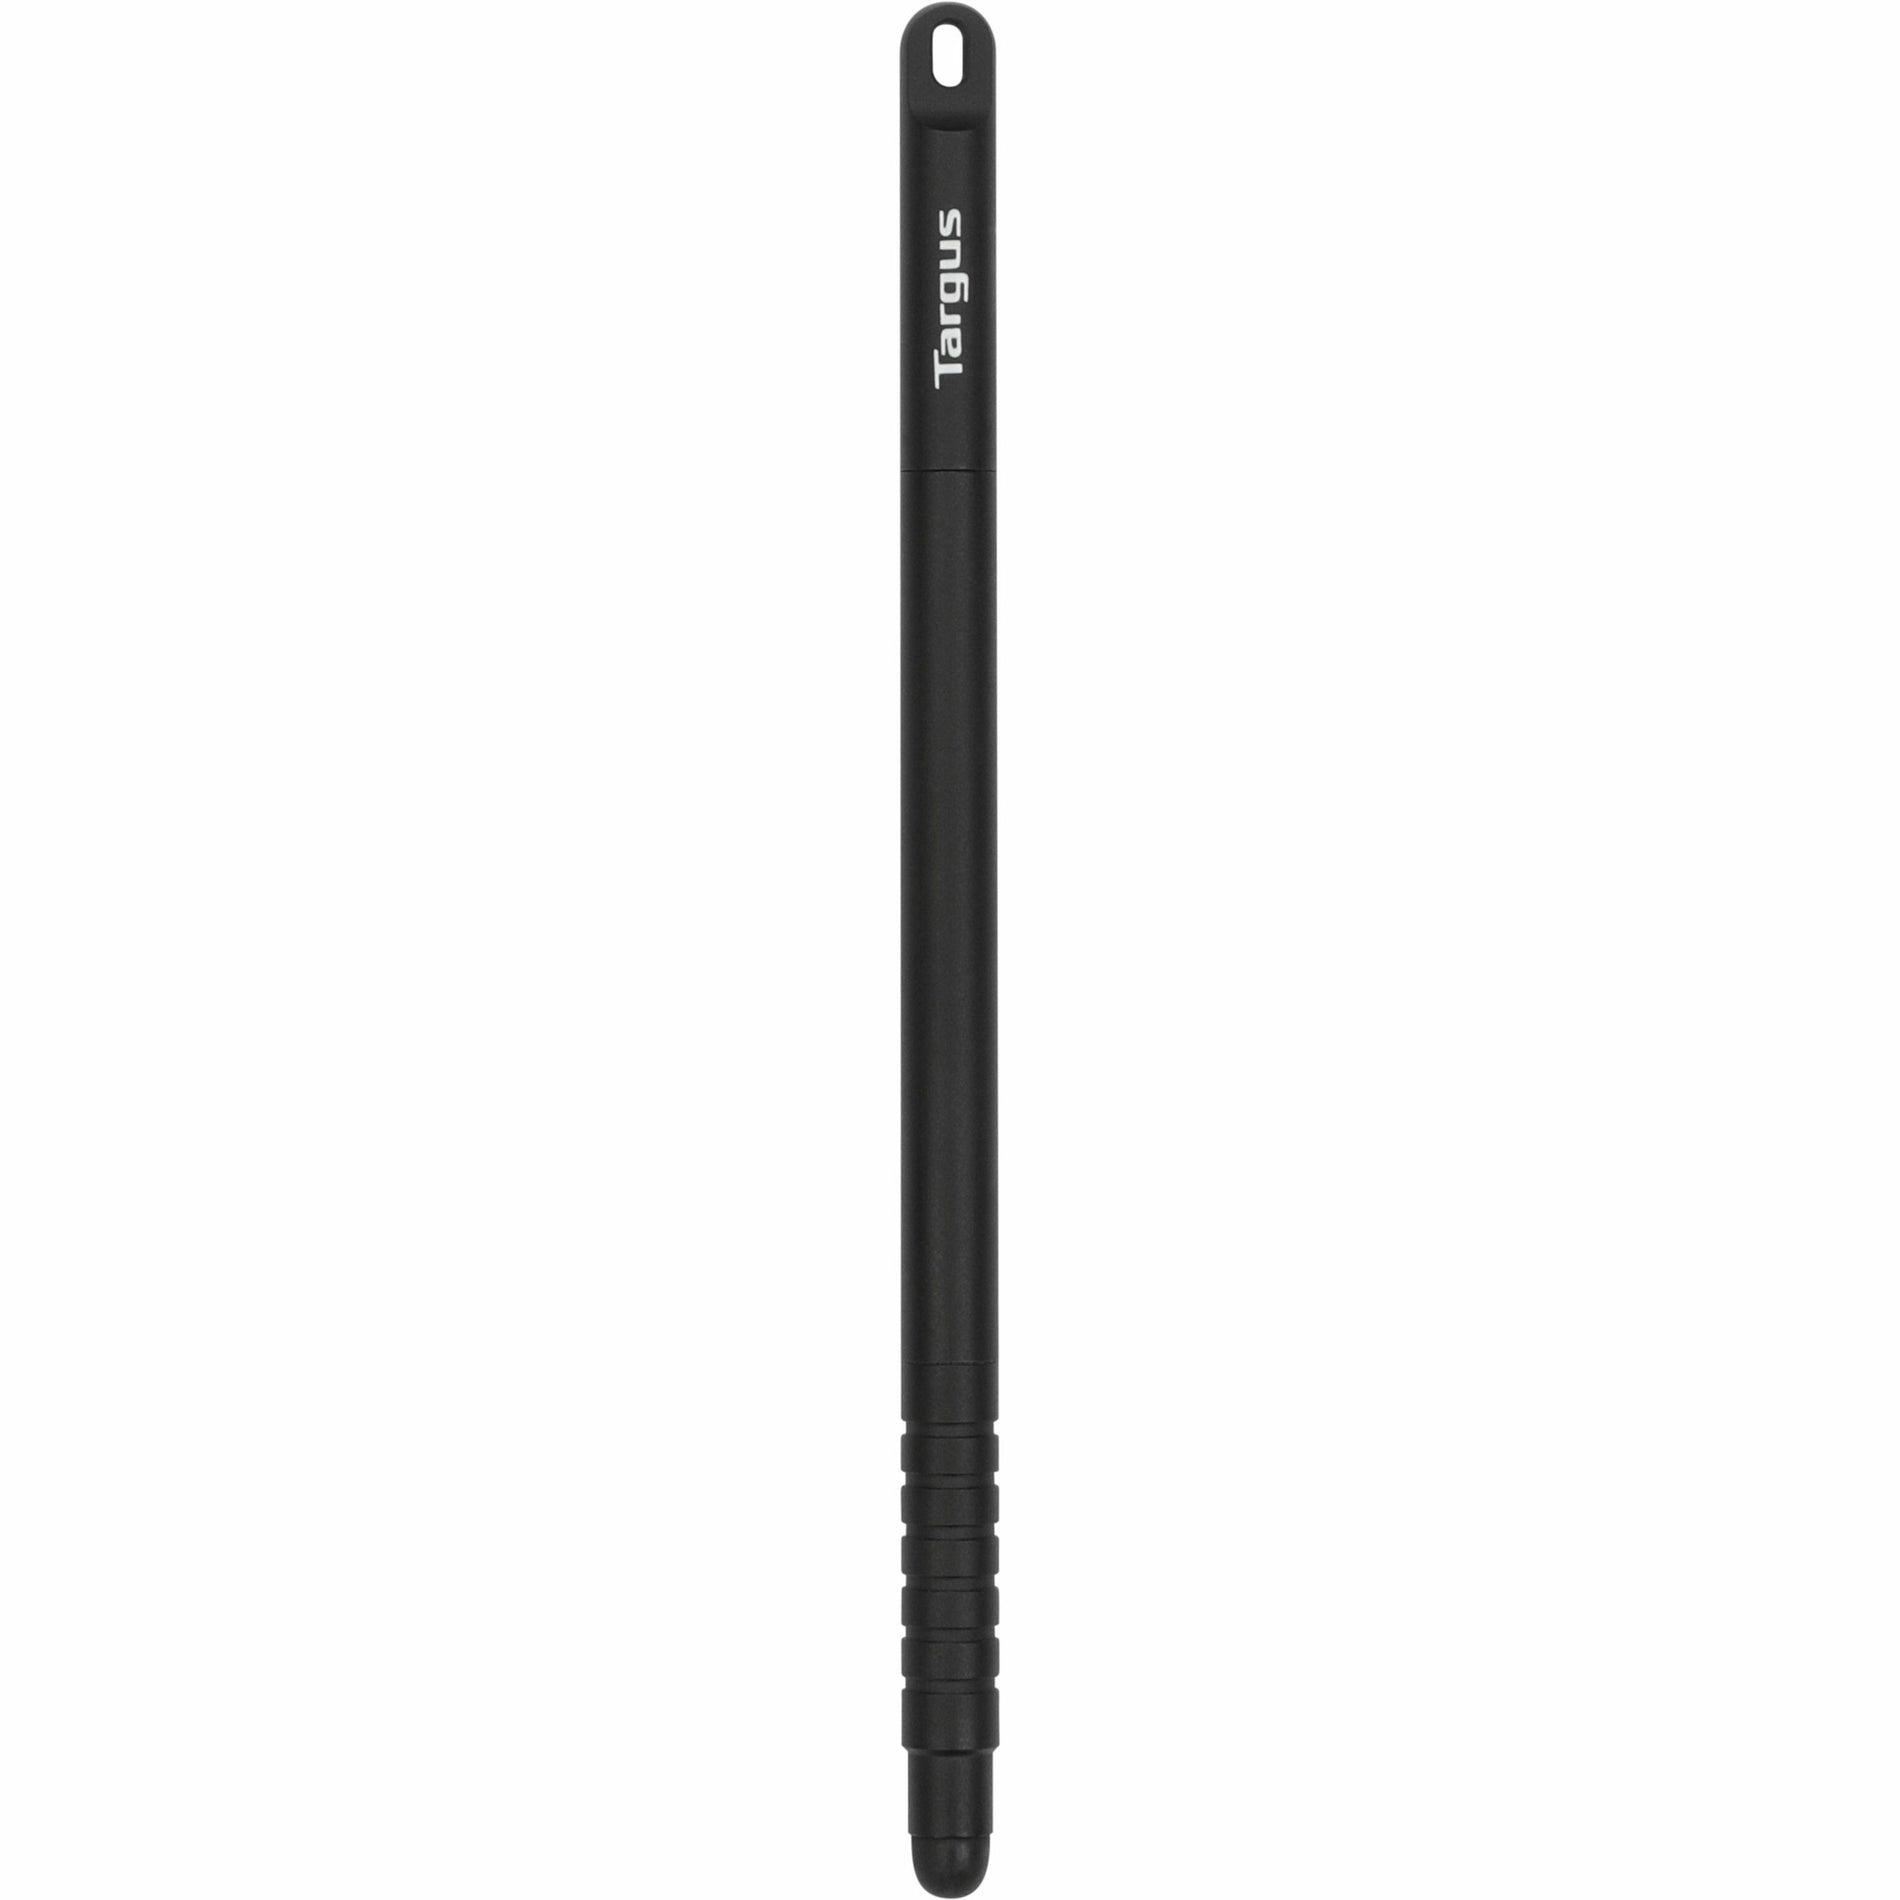 Targus AMM168GLX 6" Magnetic Stylus, Universal Touchscreen Stylus for Tablet, Smartphone, Mobile Phone